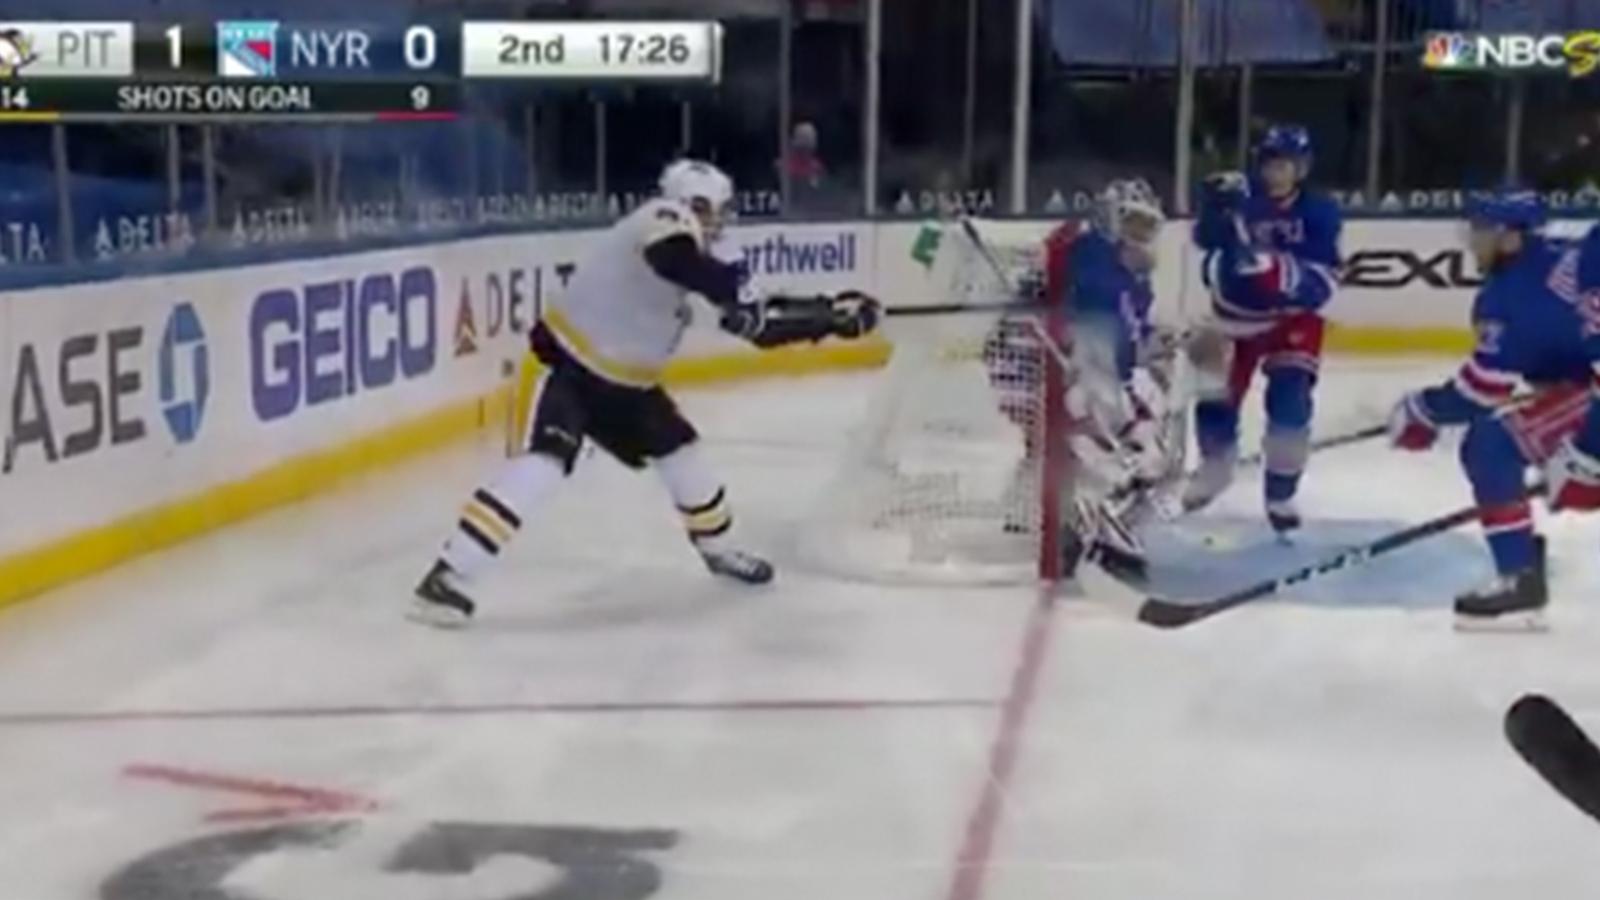 Crosby puts his own twist on the Michigan/Lacrosse style goal